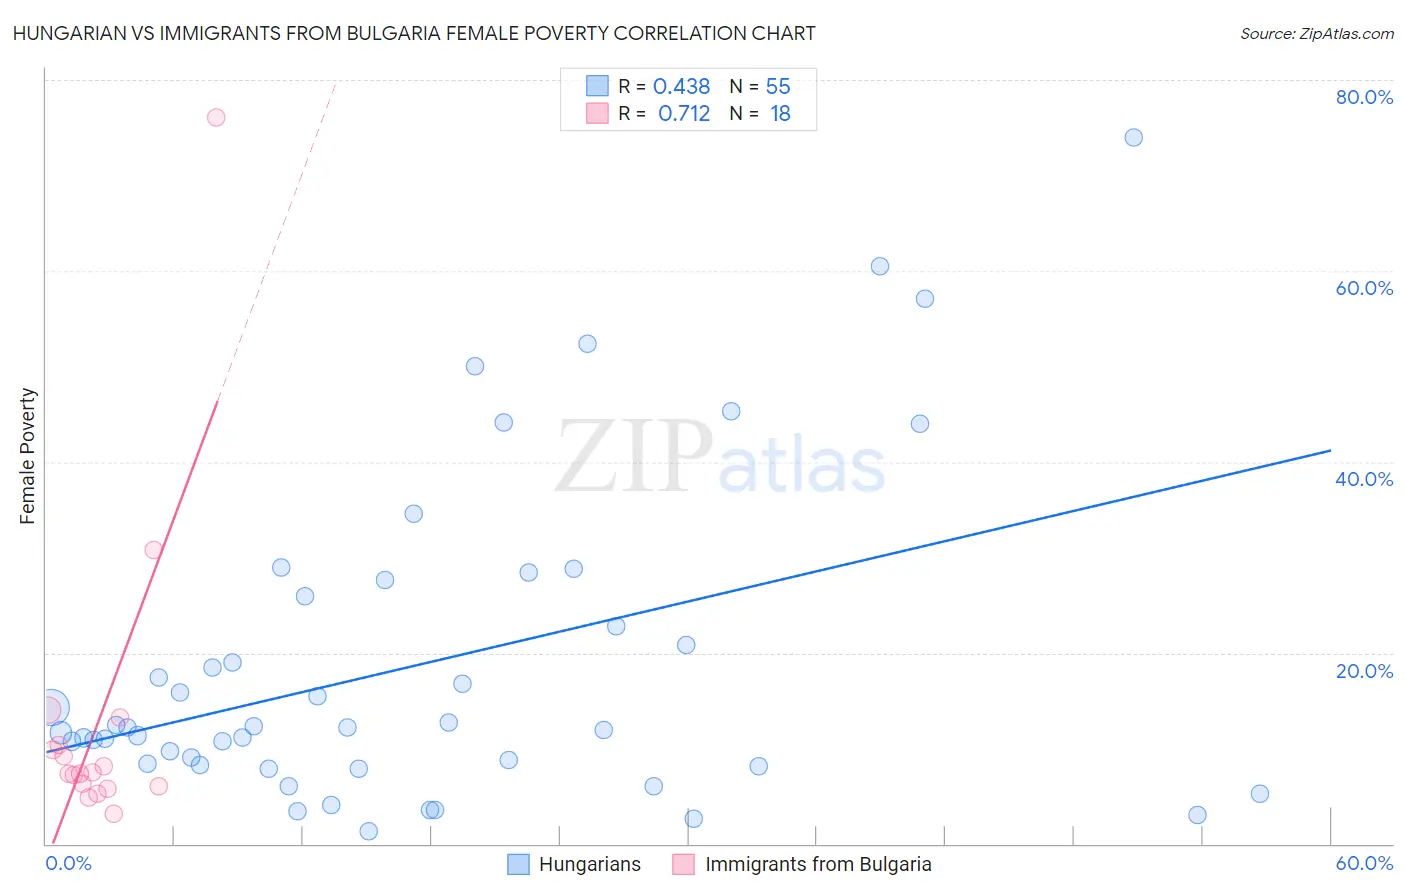 Hungarian vs Immigrants from Bulgaria Female Poverty